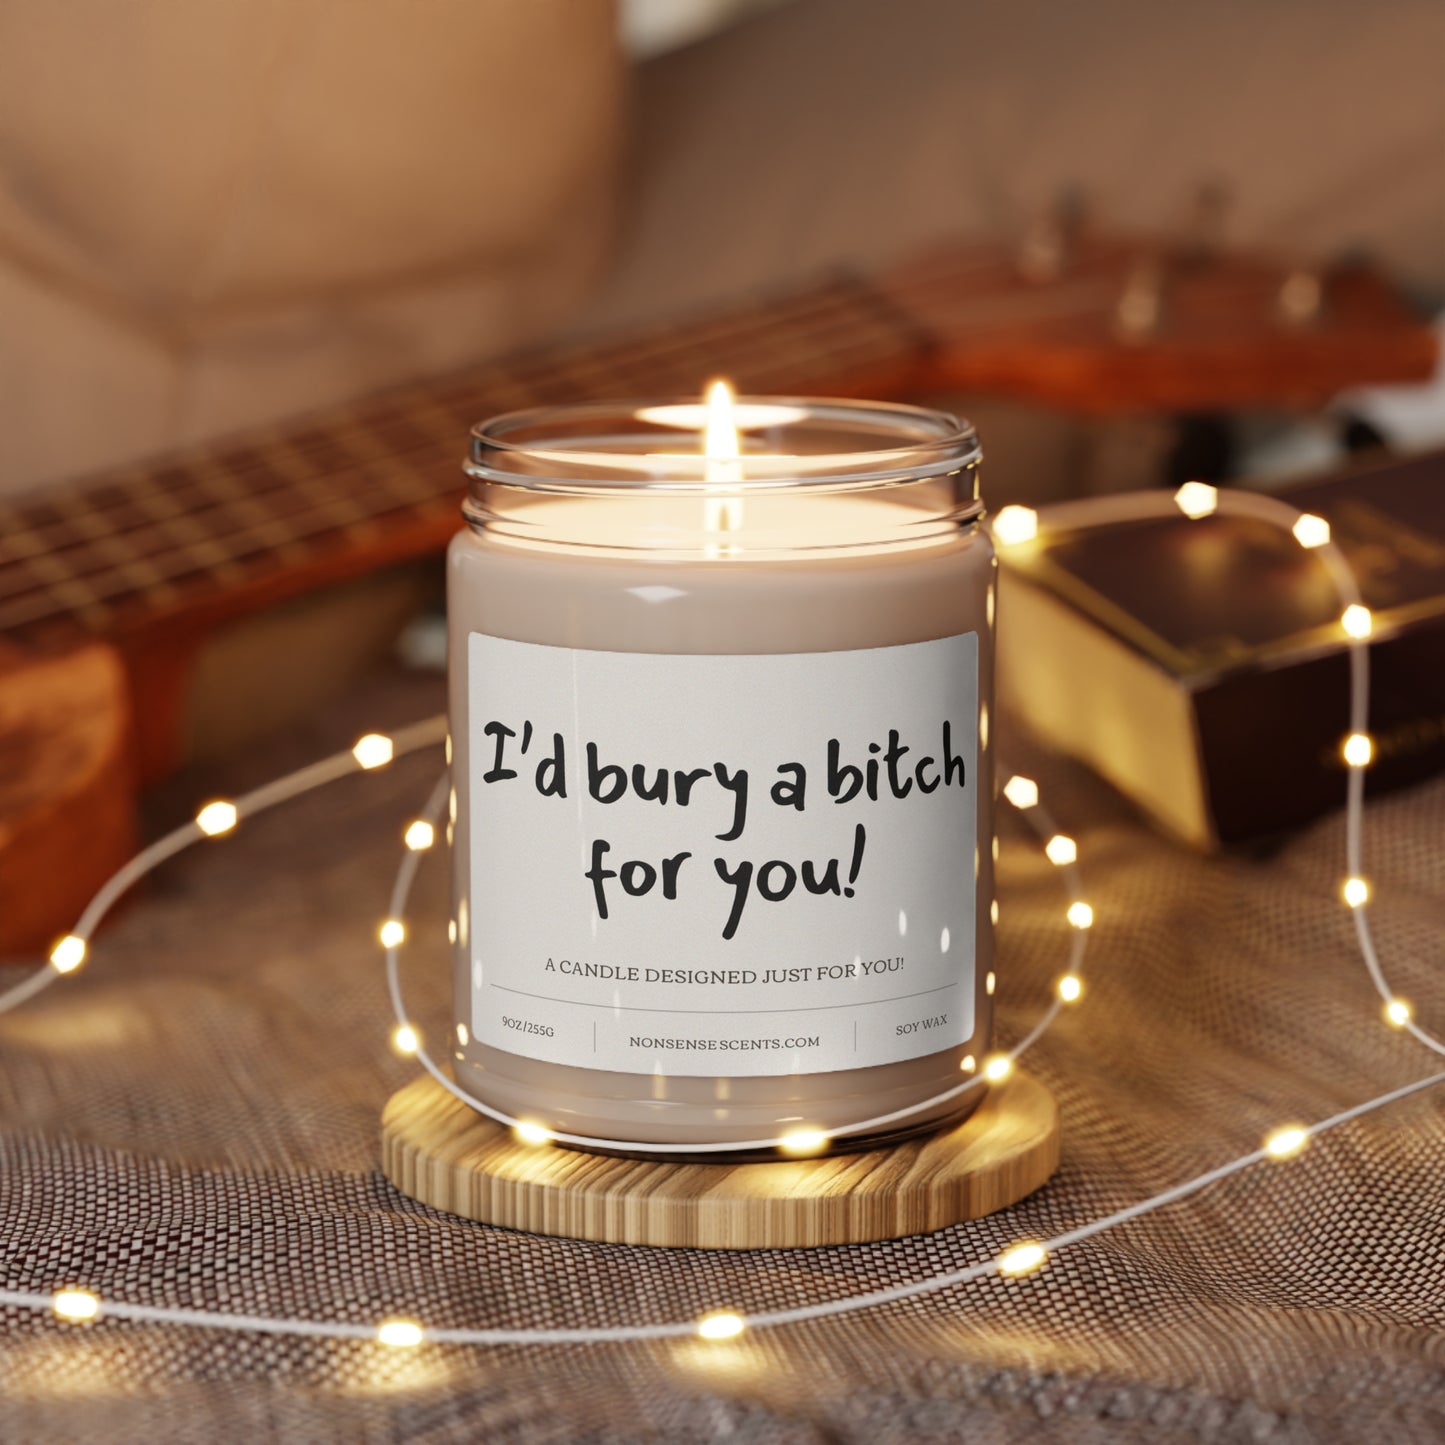 "I'd Bury A Bitch For You!" Scented Candle